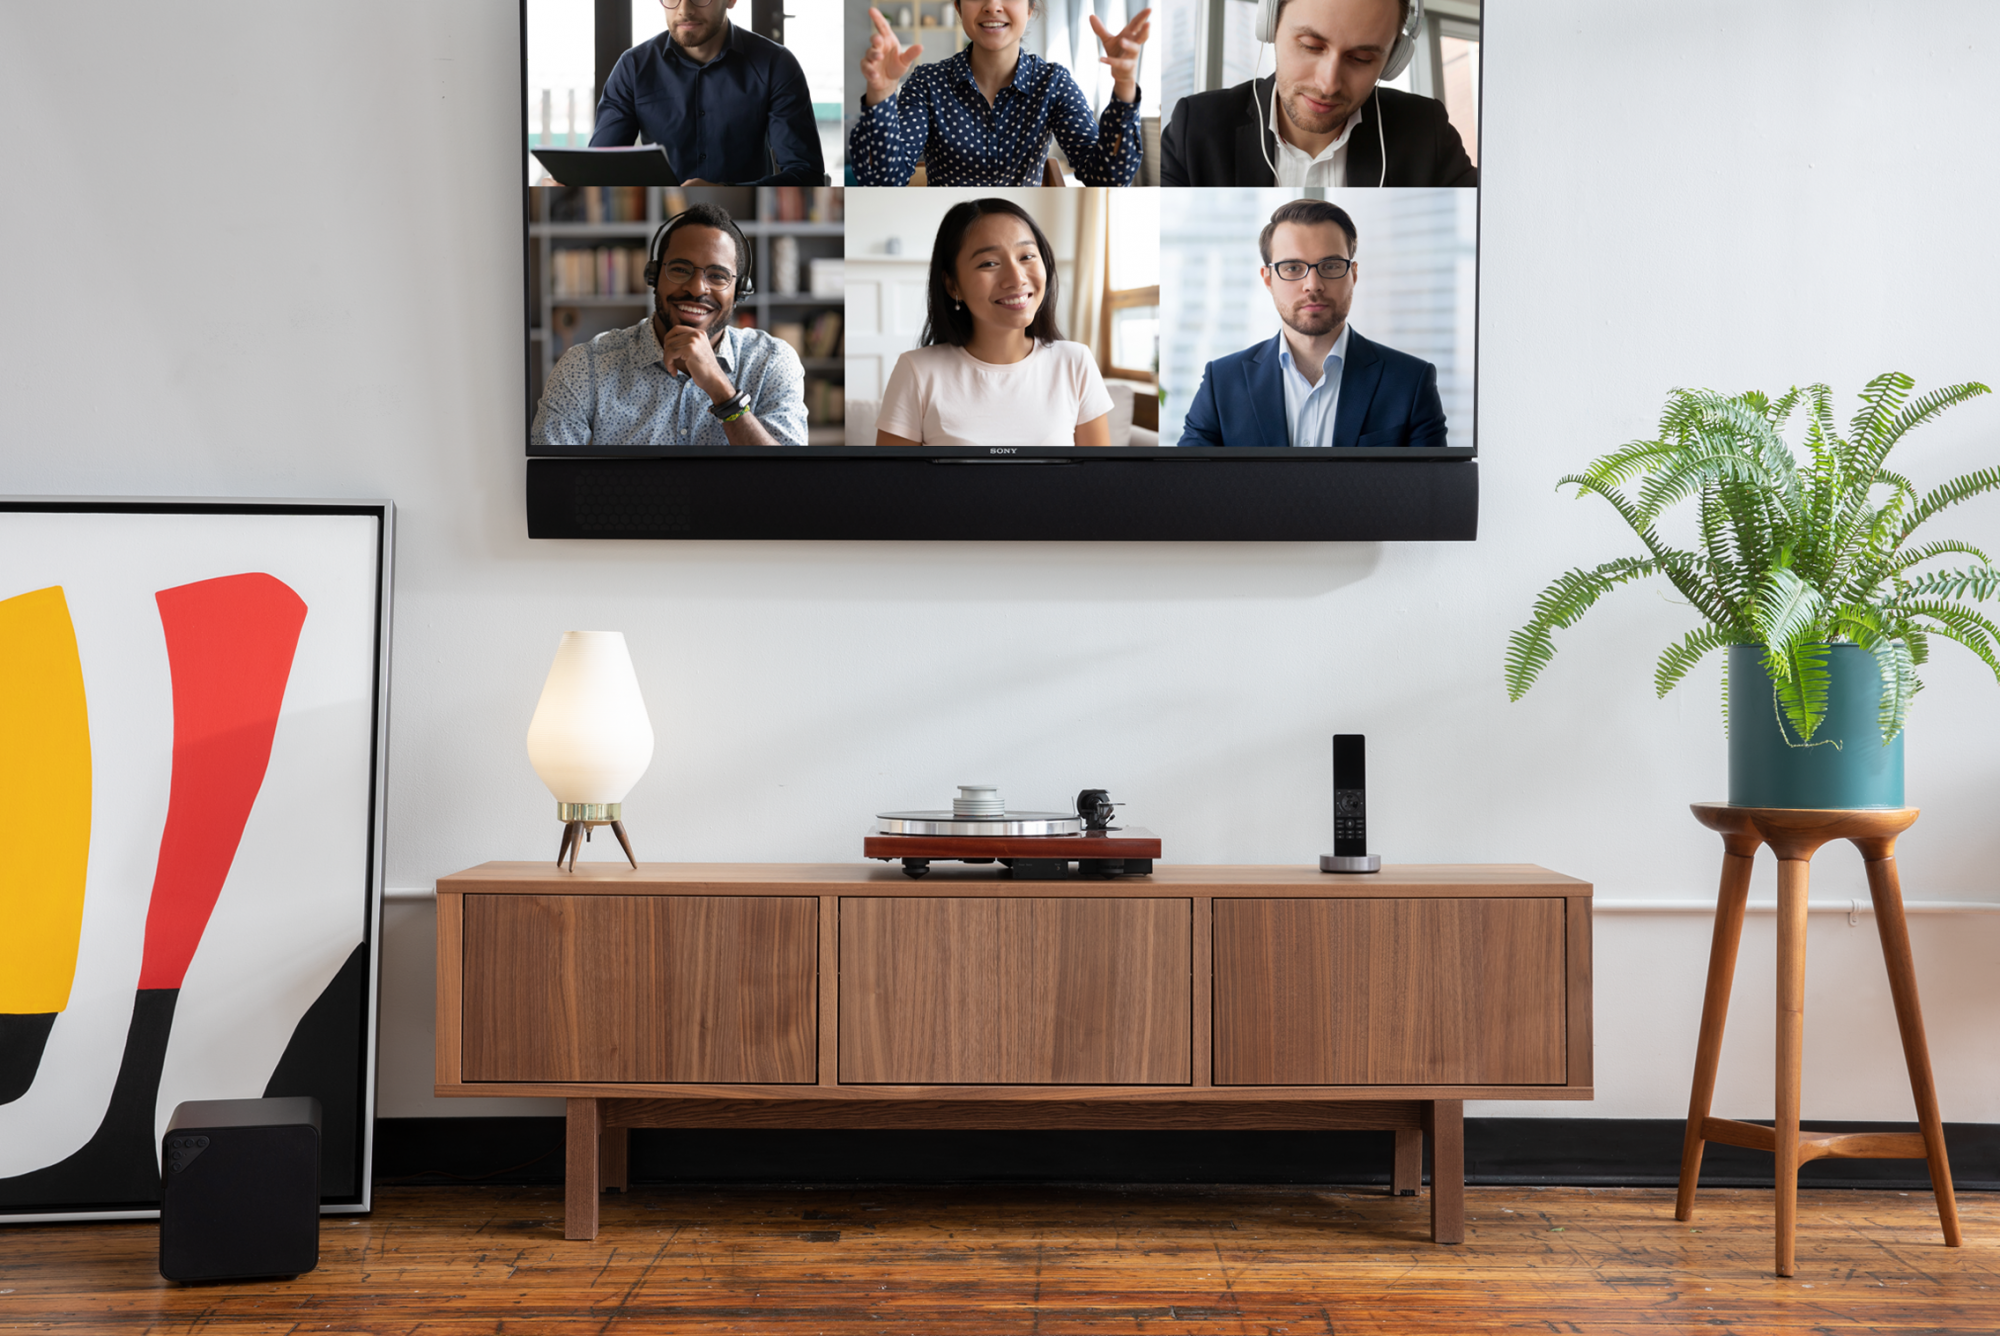 Savant has introduced an integration with Zoom’s audio/video conferencing platform, Zoom Rooms.